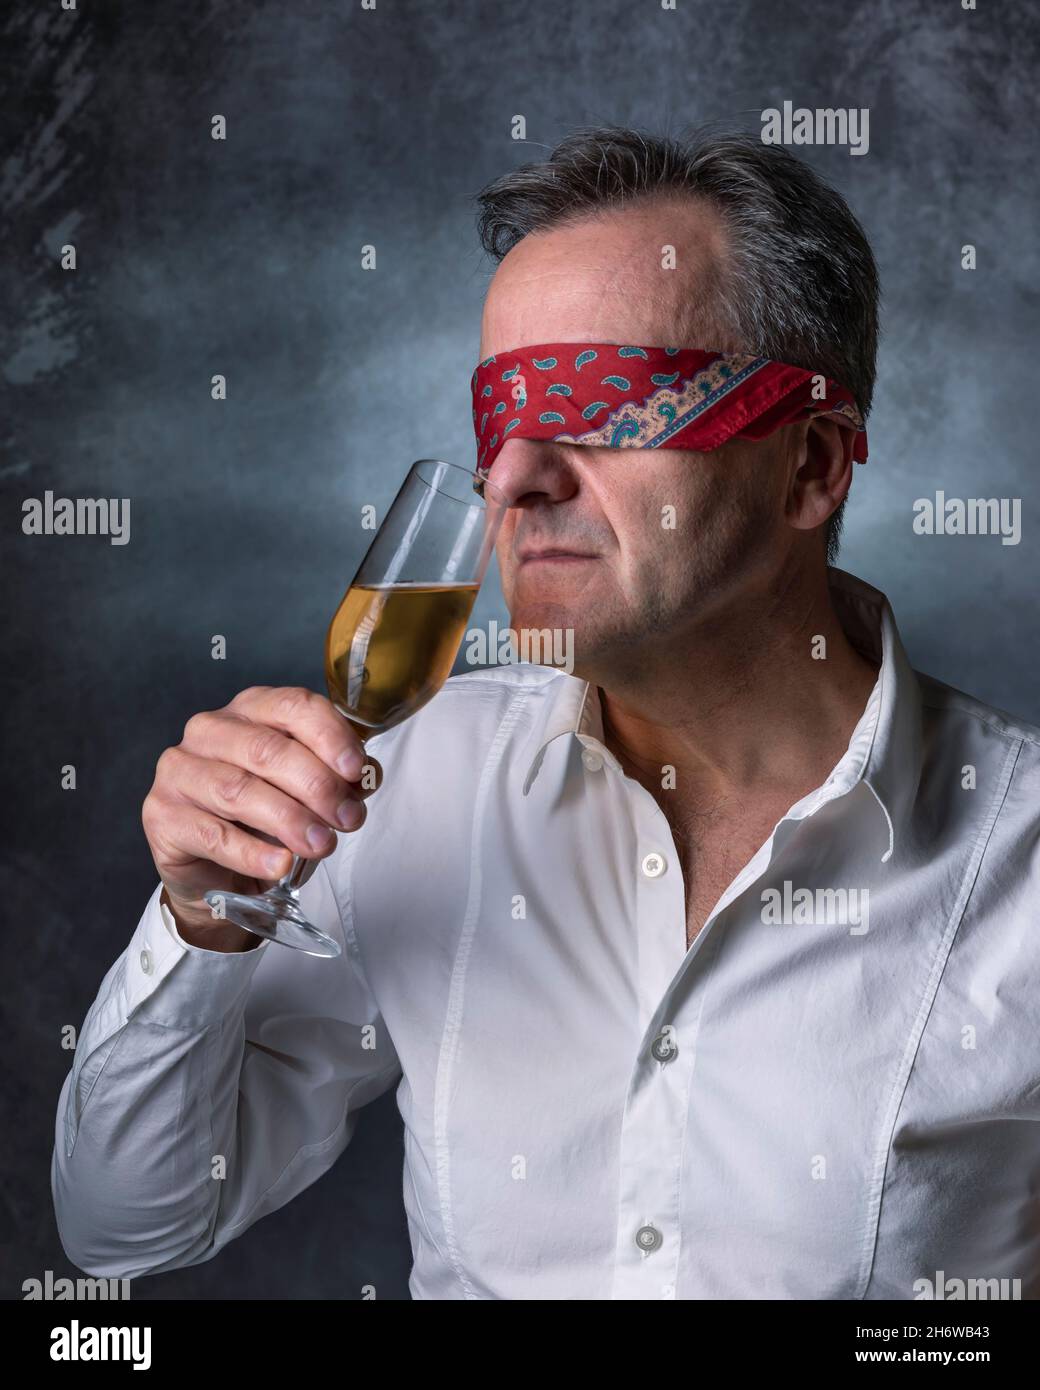 A blindfolded man sniffs a glass of wine to smell its aroma Stock Photo